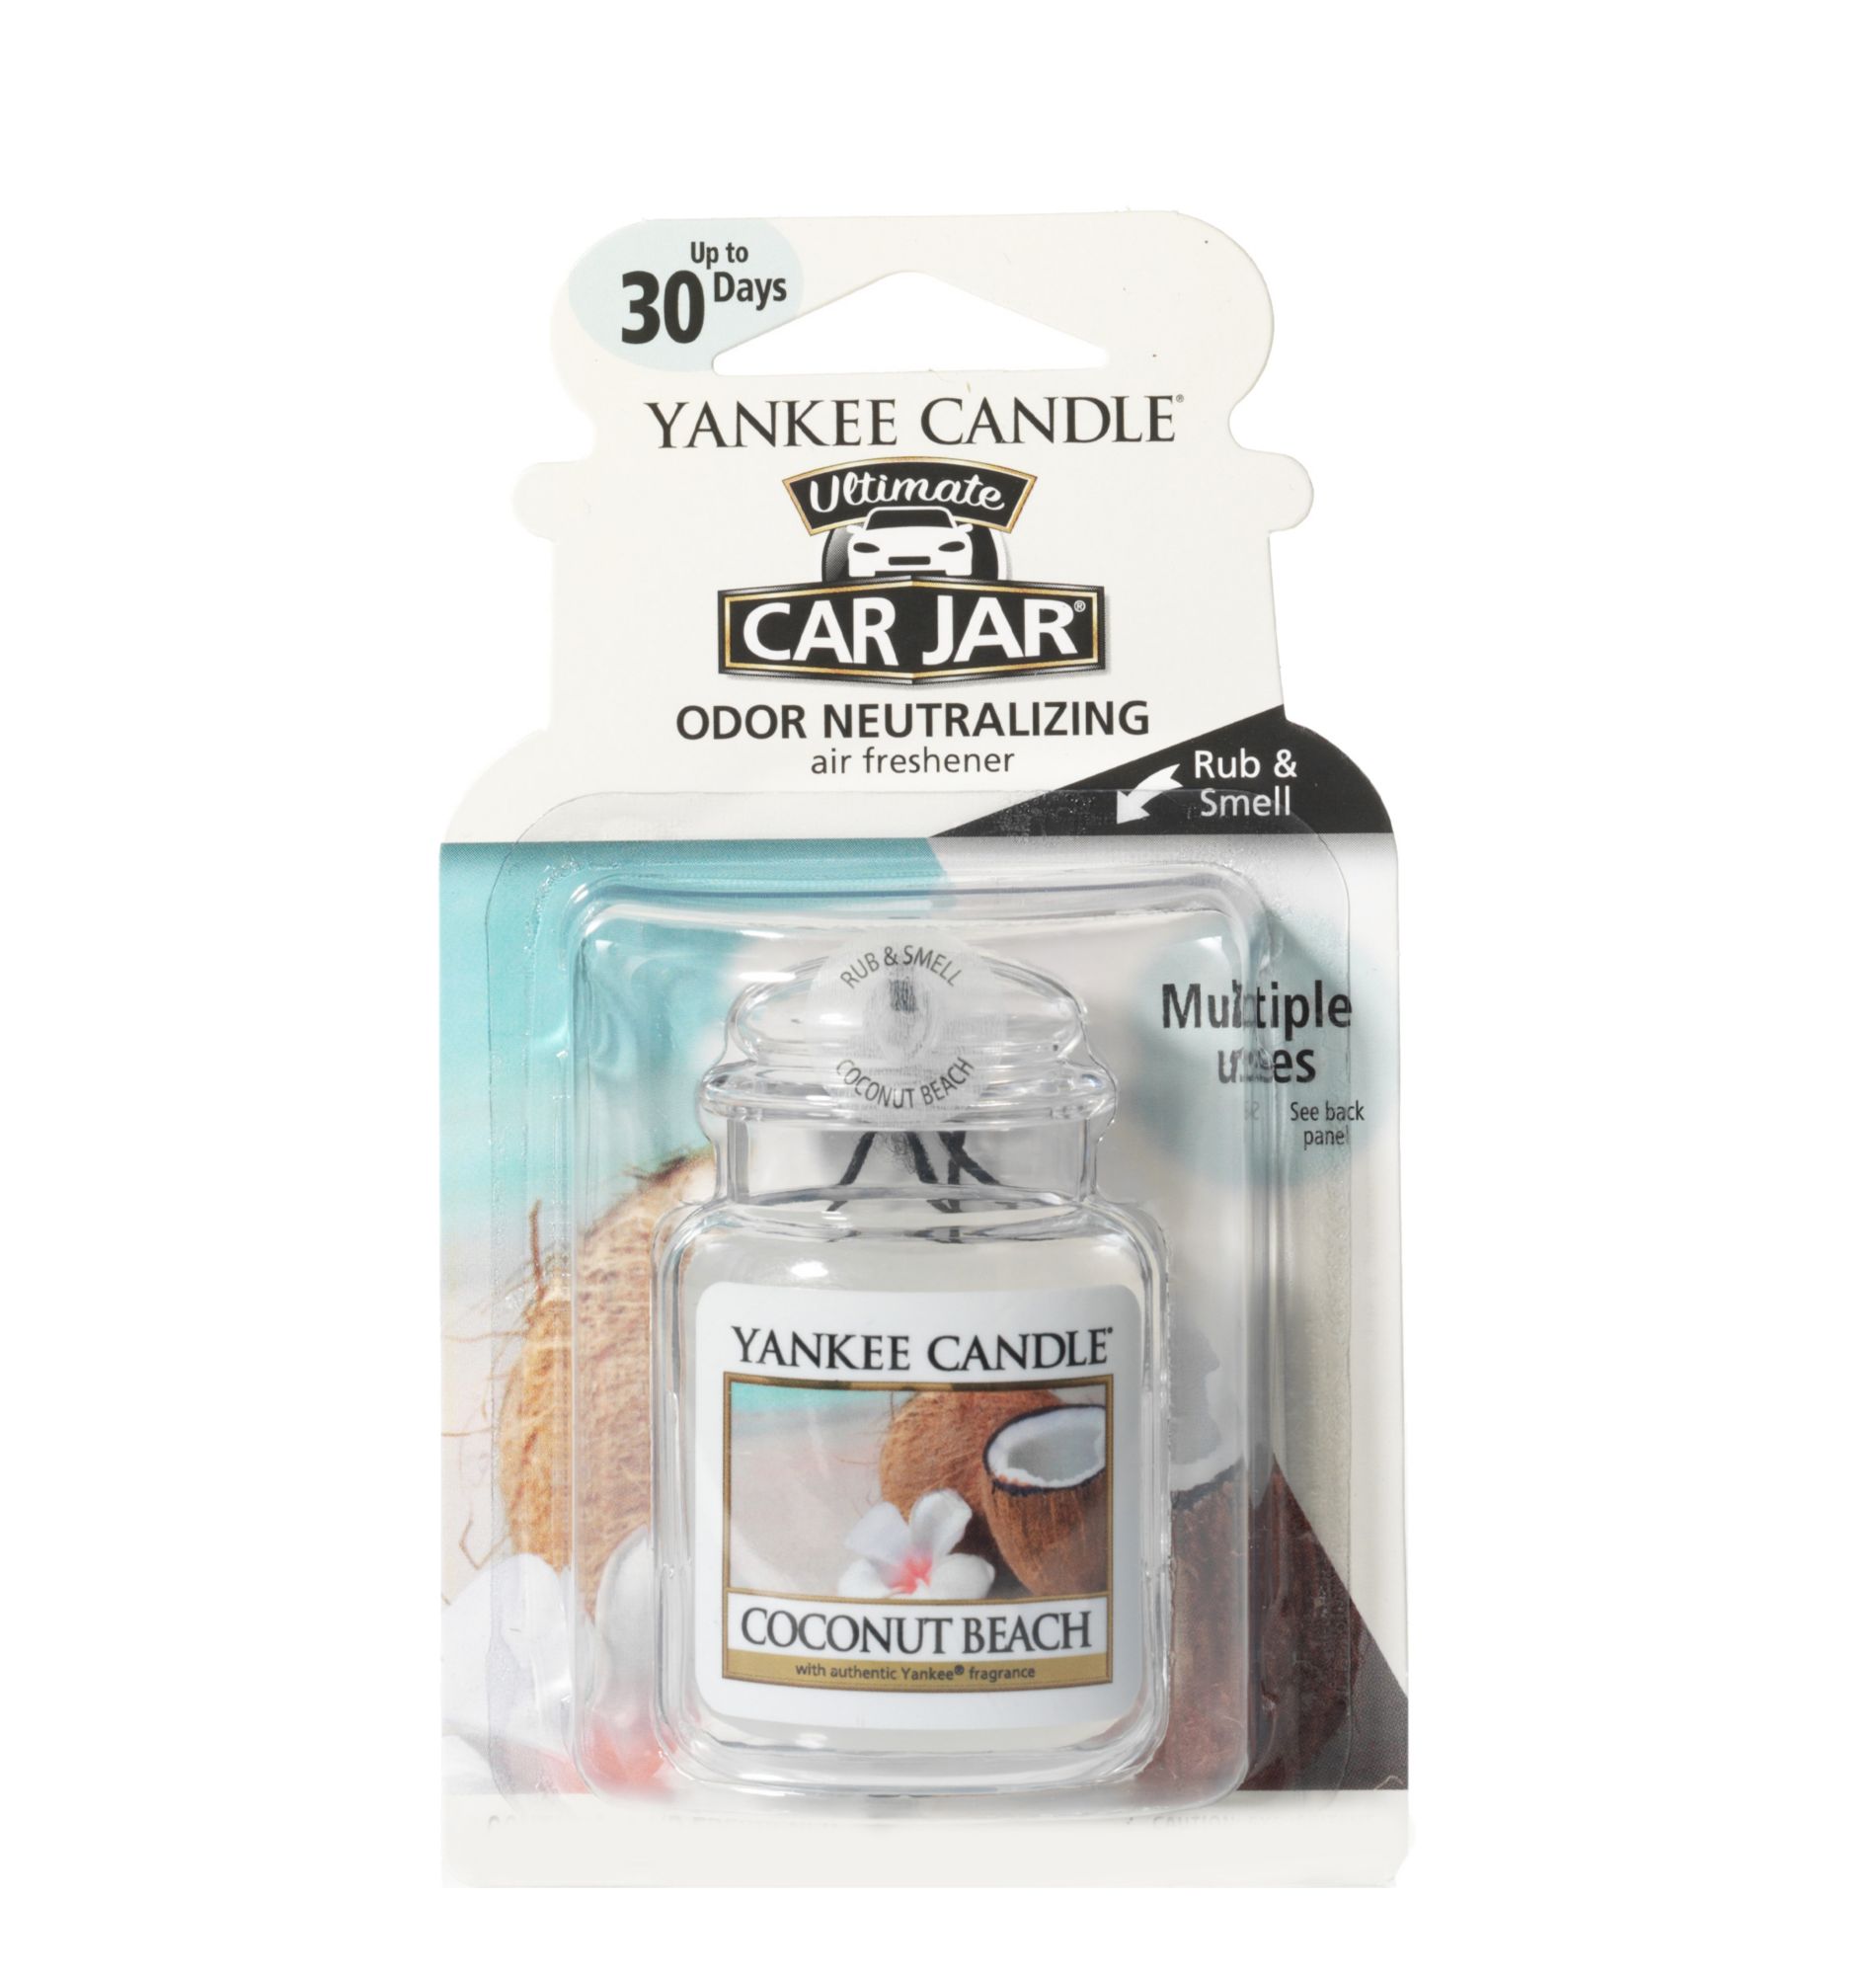 Affordable yankee candle diffuser oil For Sale